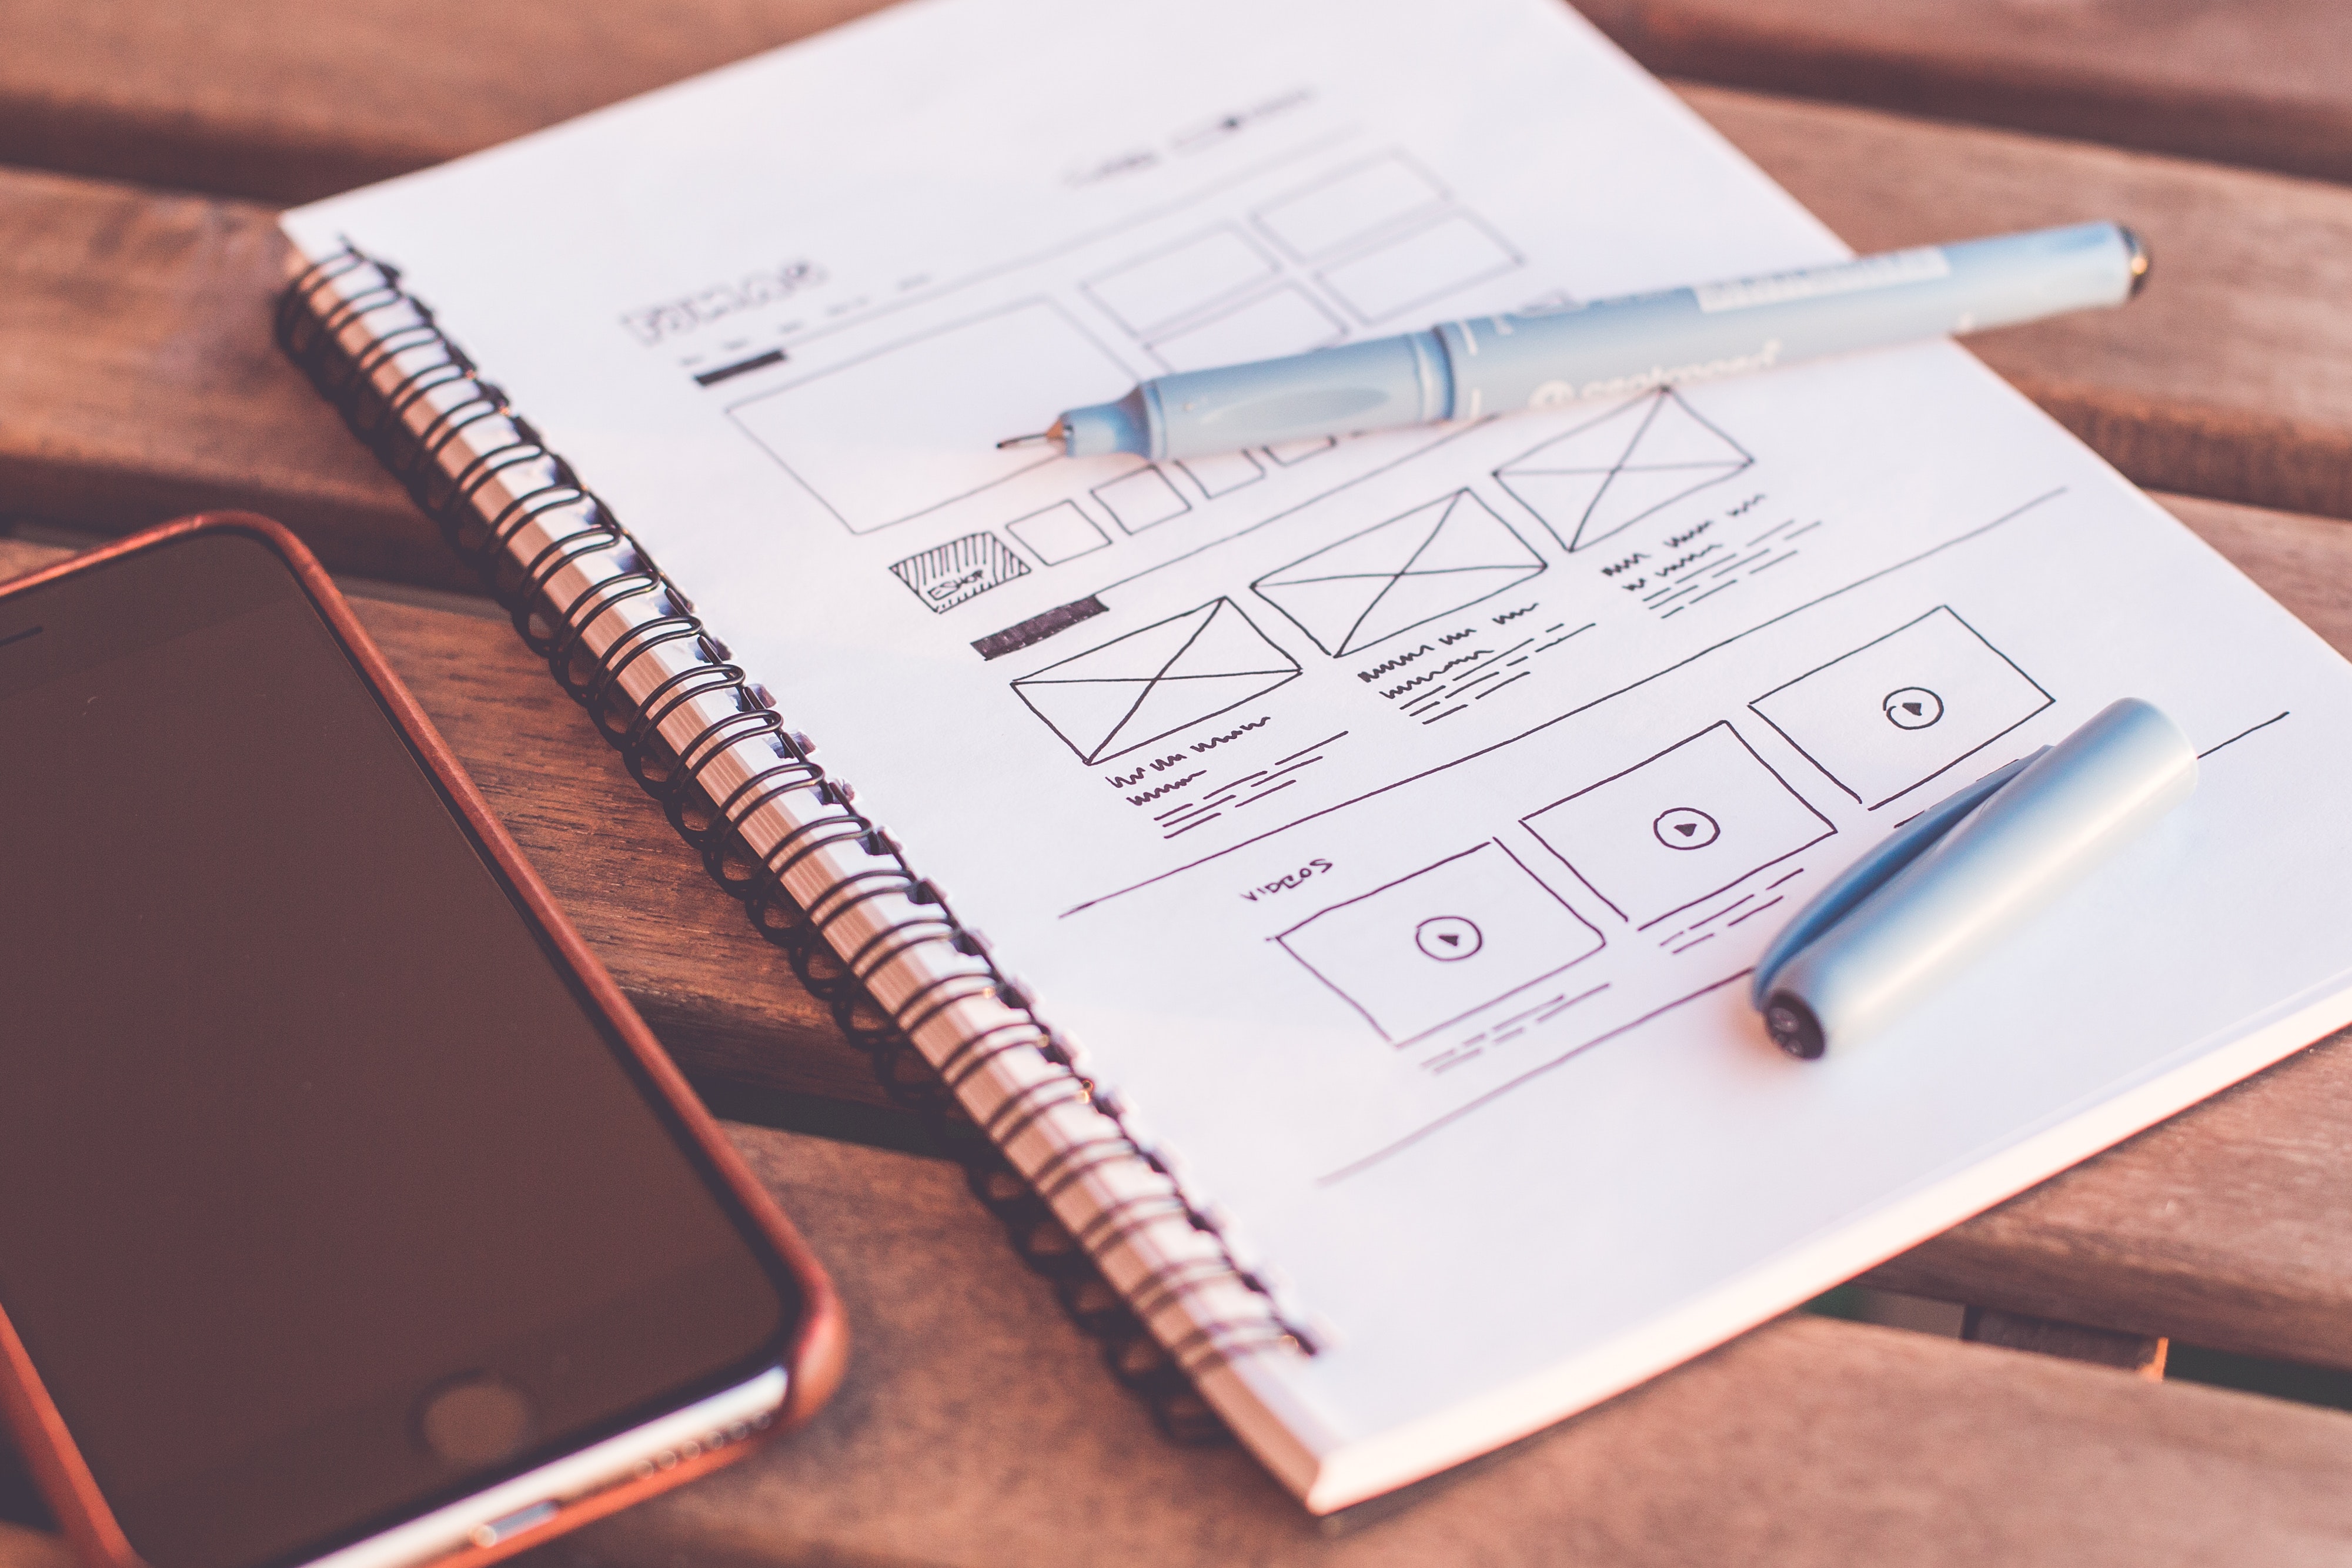 Wireframe sketching on a notebook